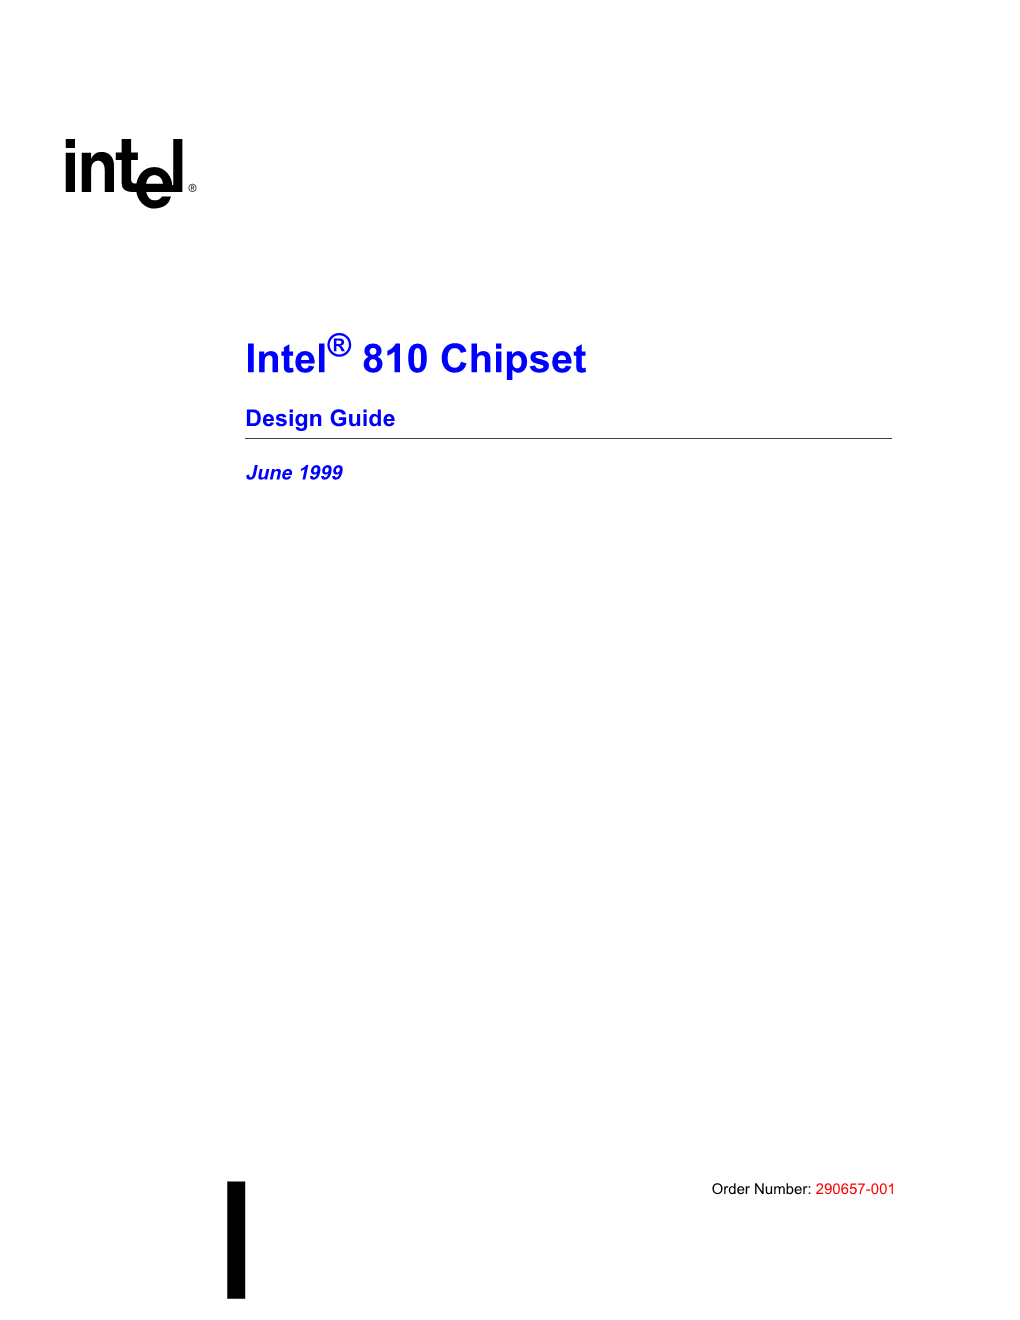 Intel 810 Chipset Systems